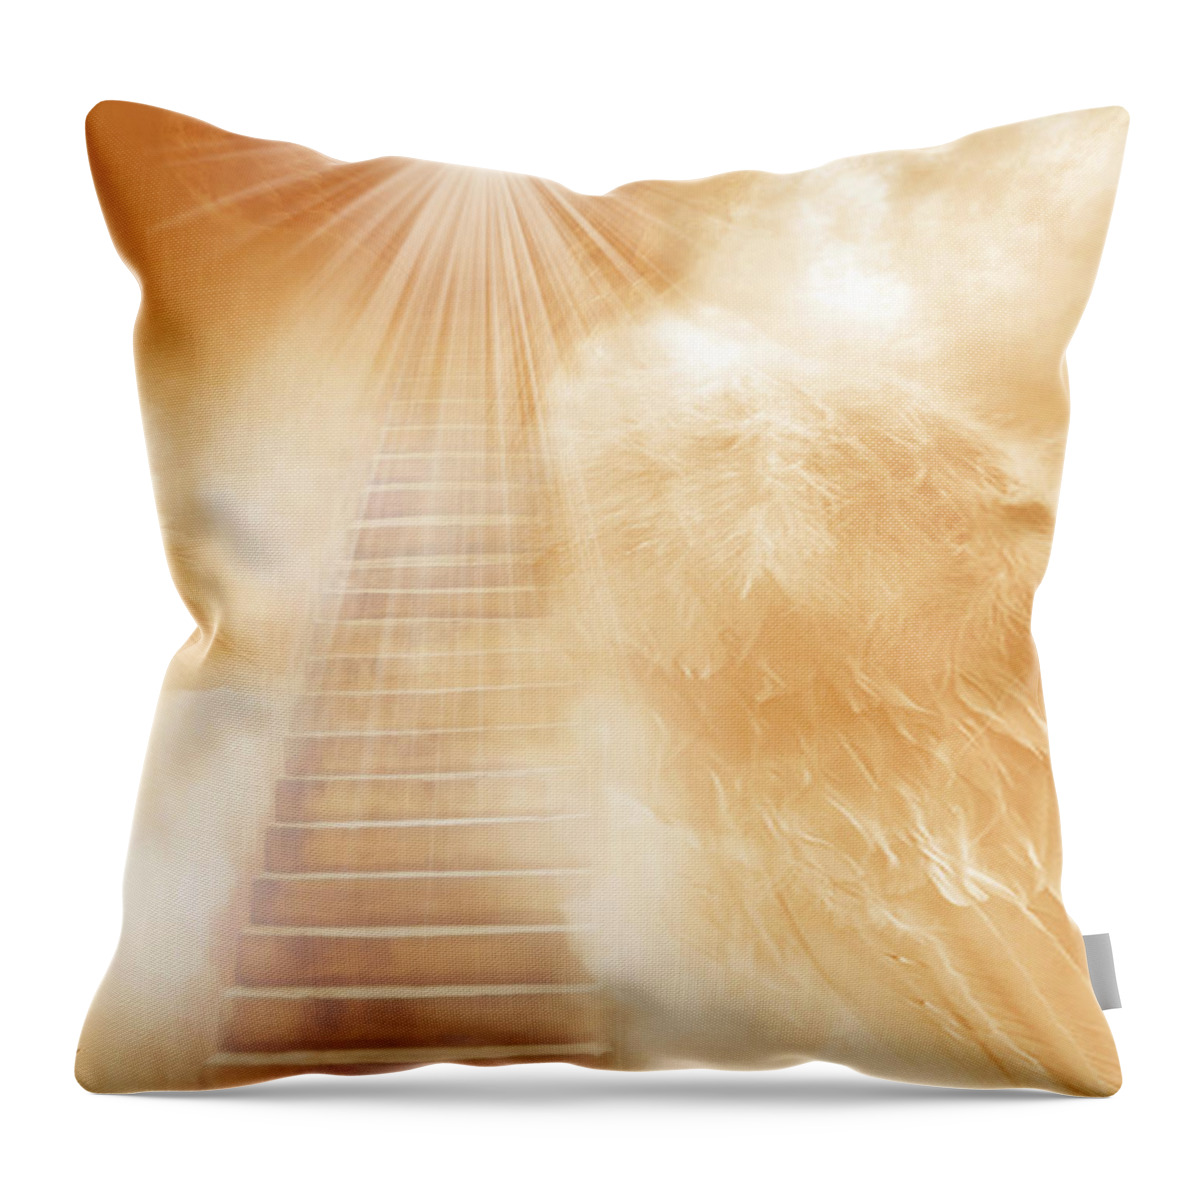 Brush Of Angels Wings Throw Pillow featuring the digital art Brush of Angels Wings by Jennifer Page